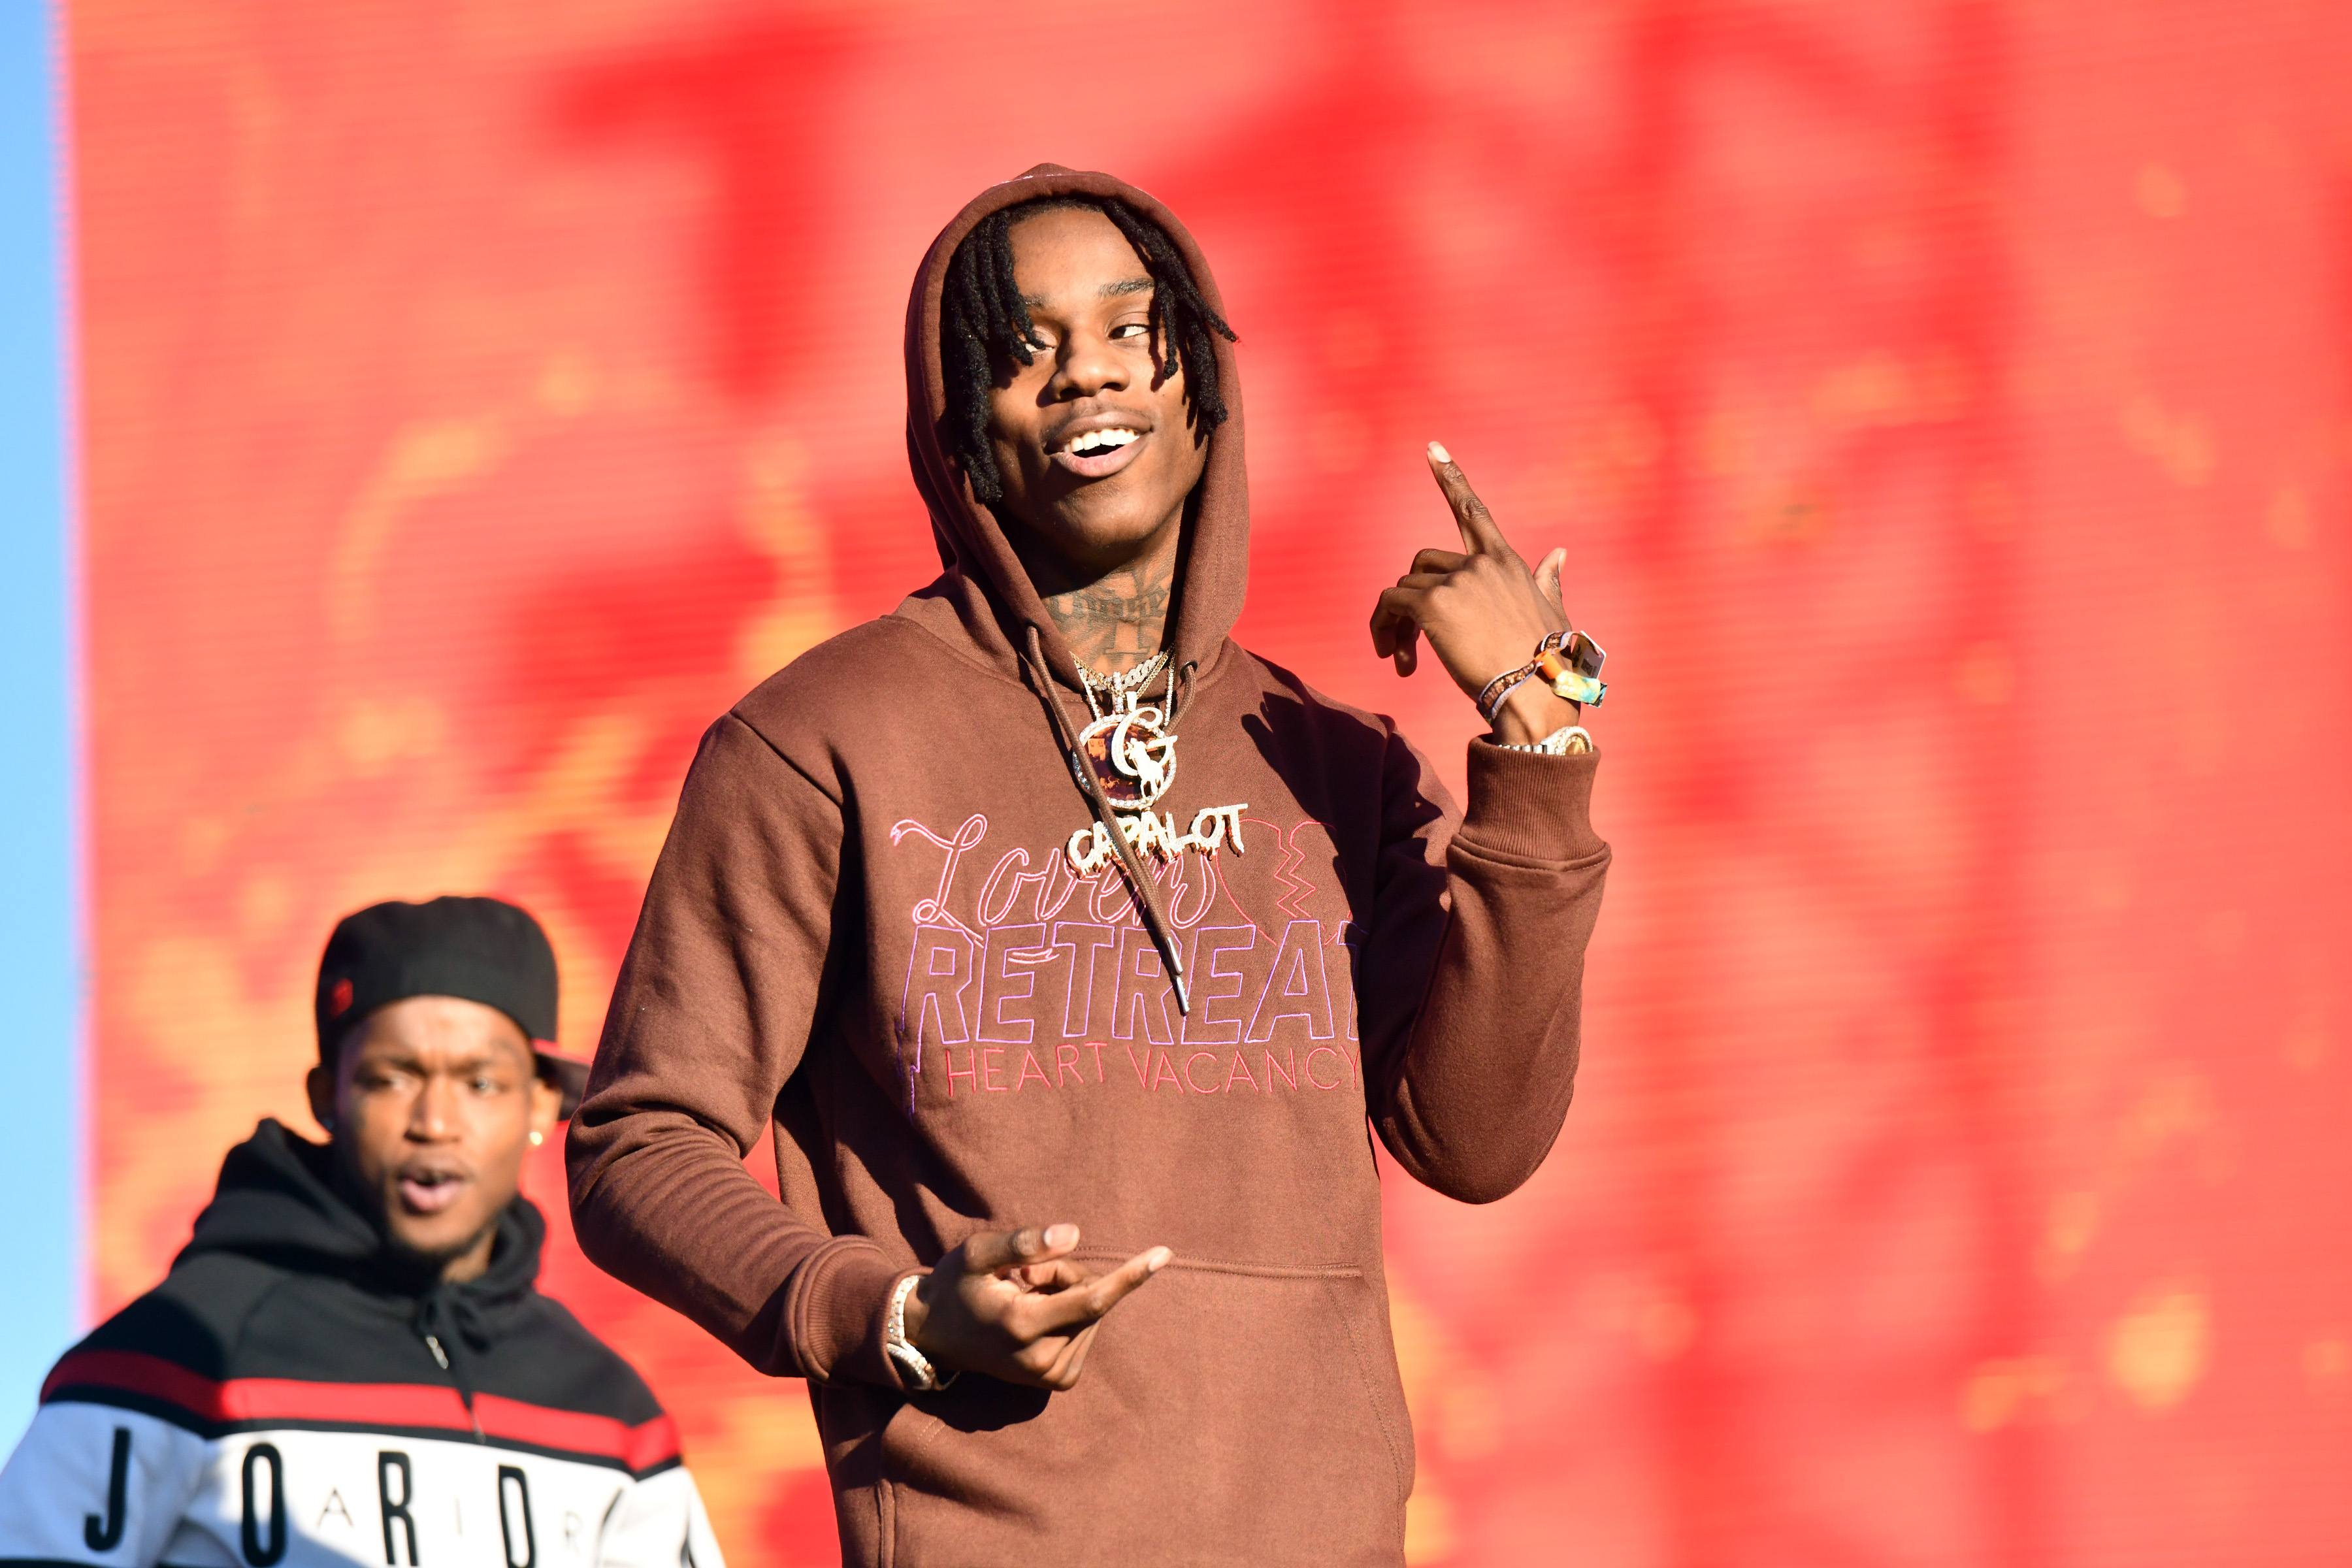 Rapper Polo G performs onstage during day 2 of the Rolling Loud Festival